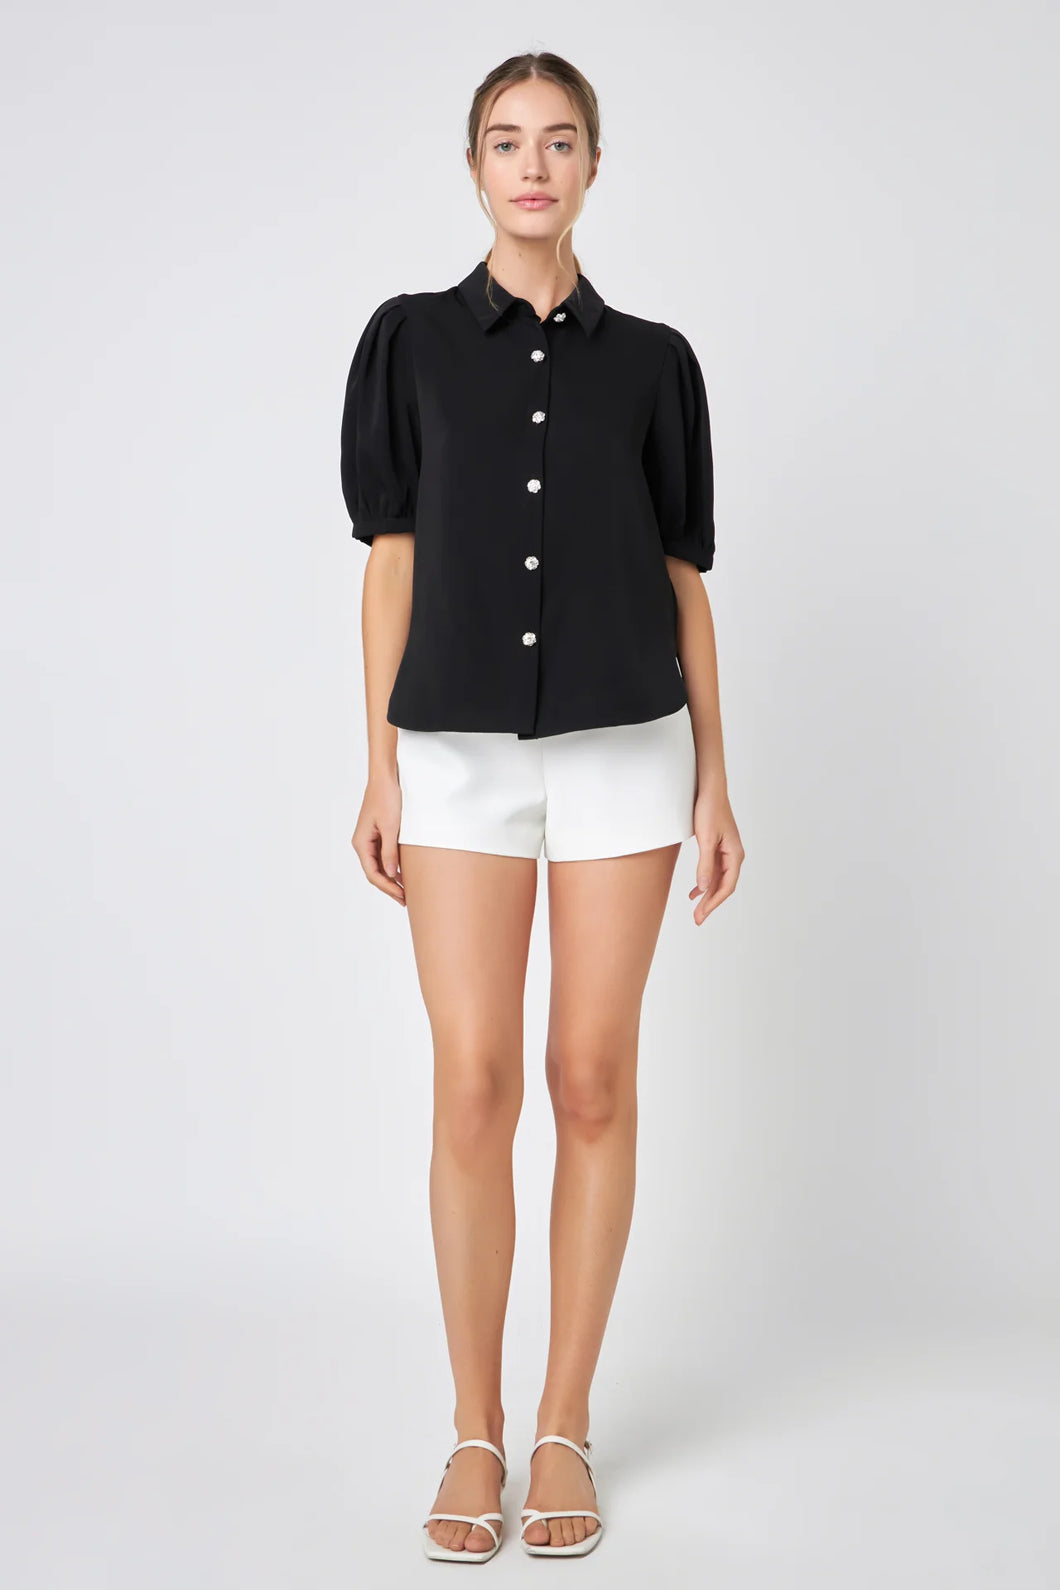 Black Satin Short Sleeve Blouse with Accent Buttons